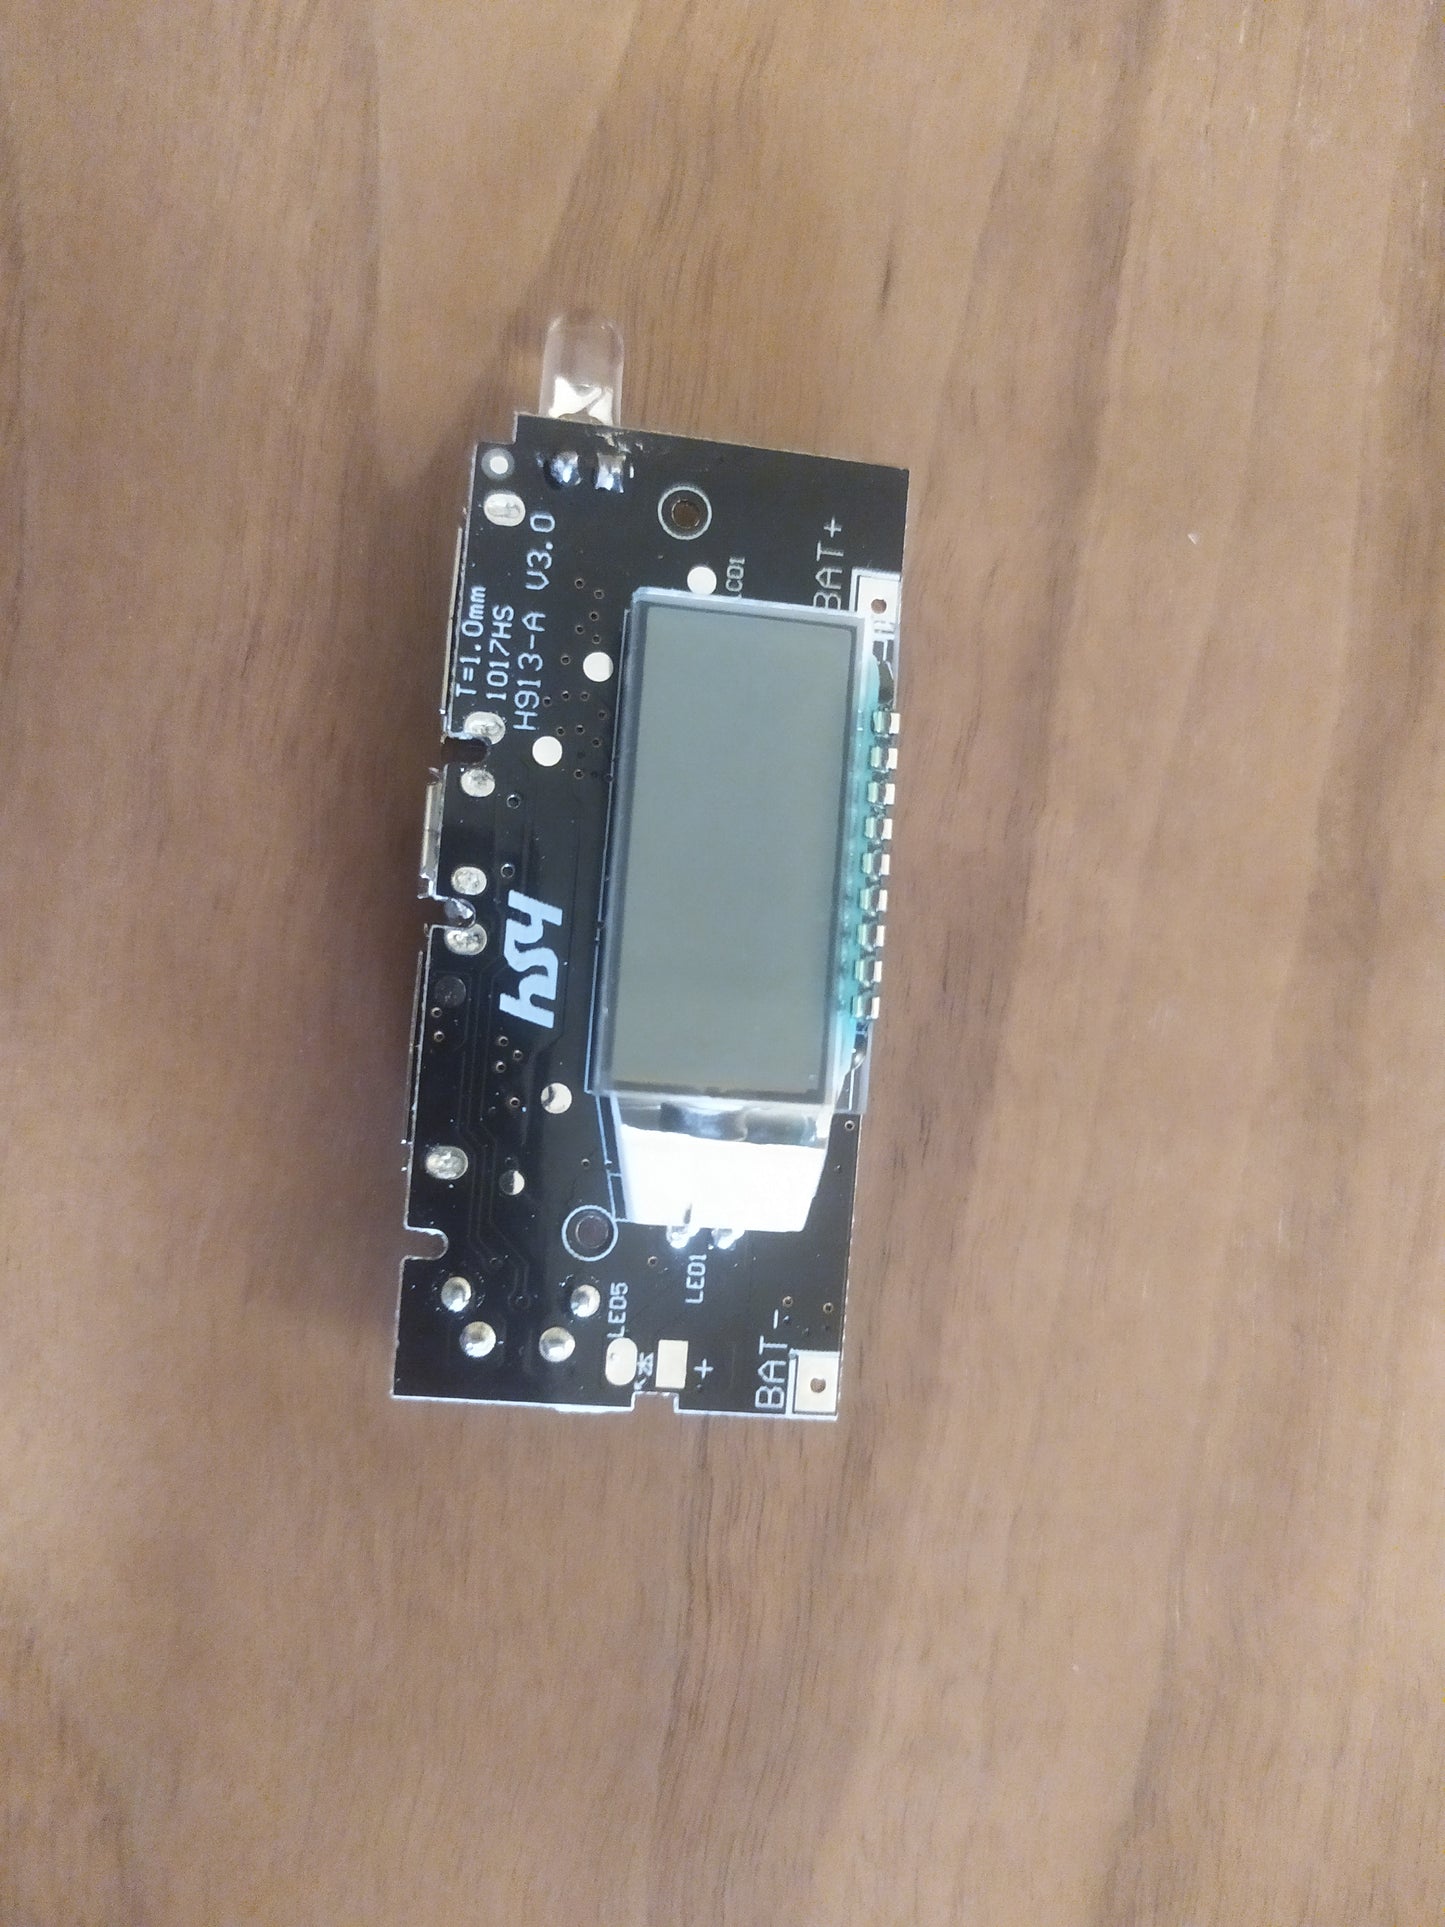 Power Bank 18650 Battery Charging Module with display